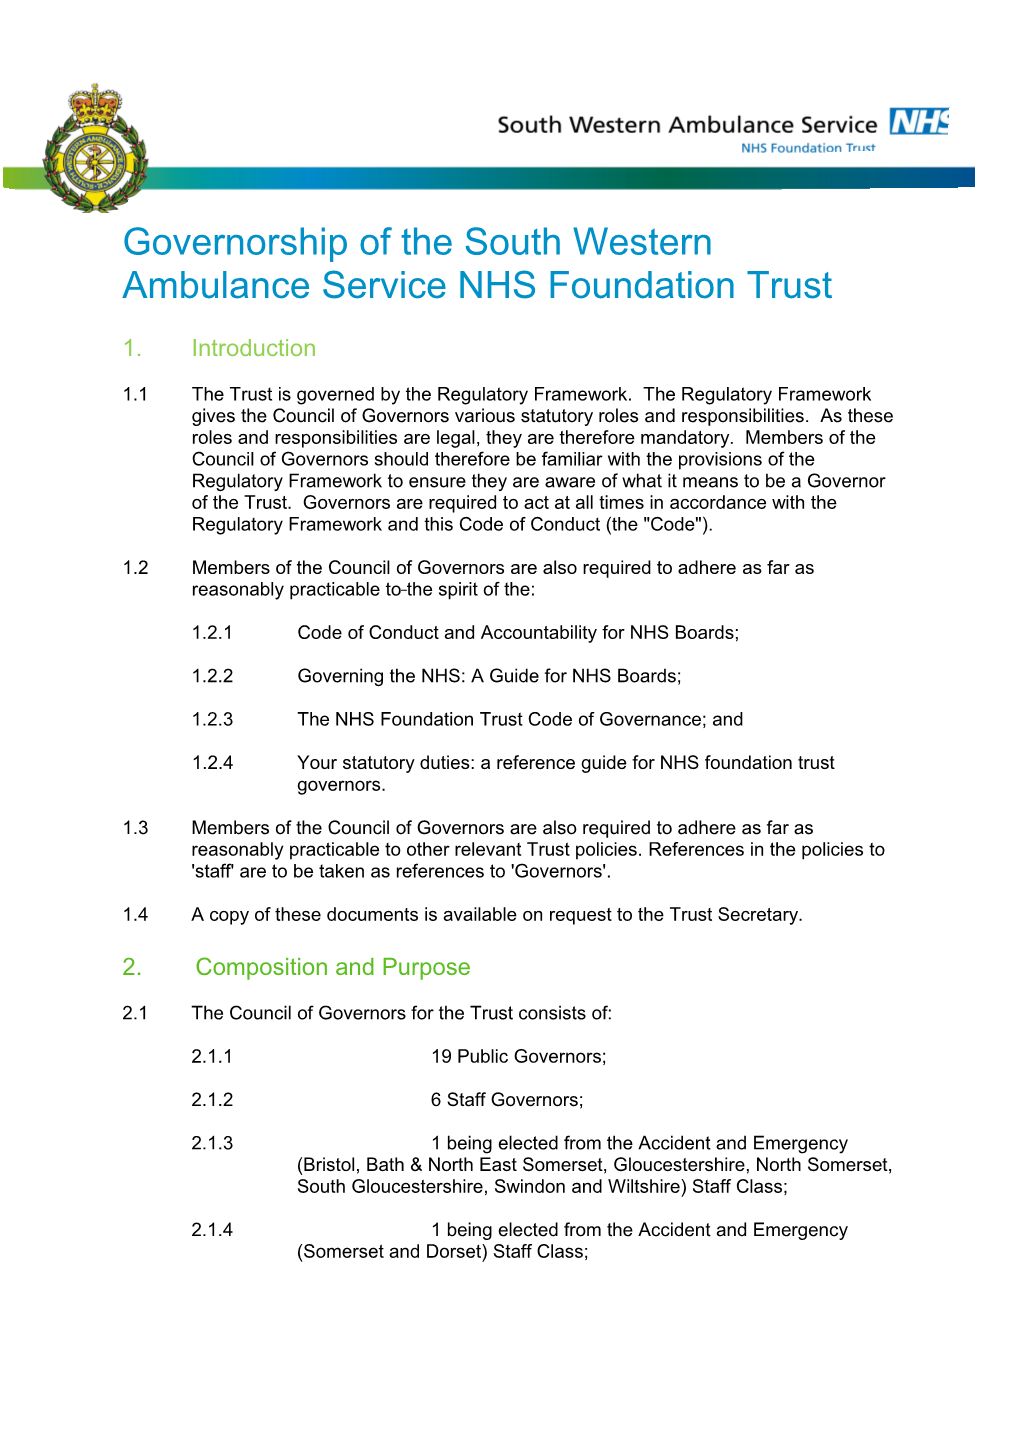 Responsibilities and Code of Conduct for Trust Governors